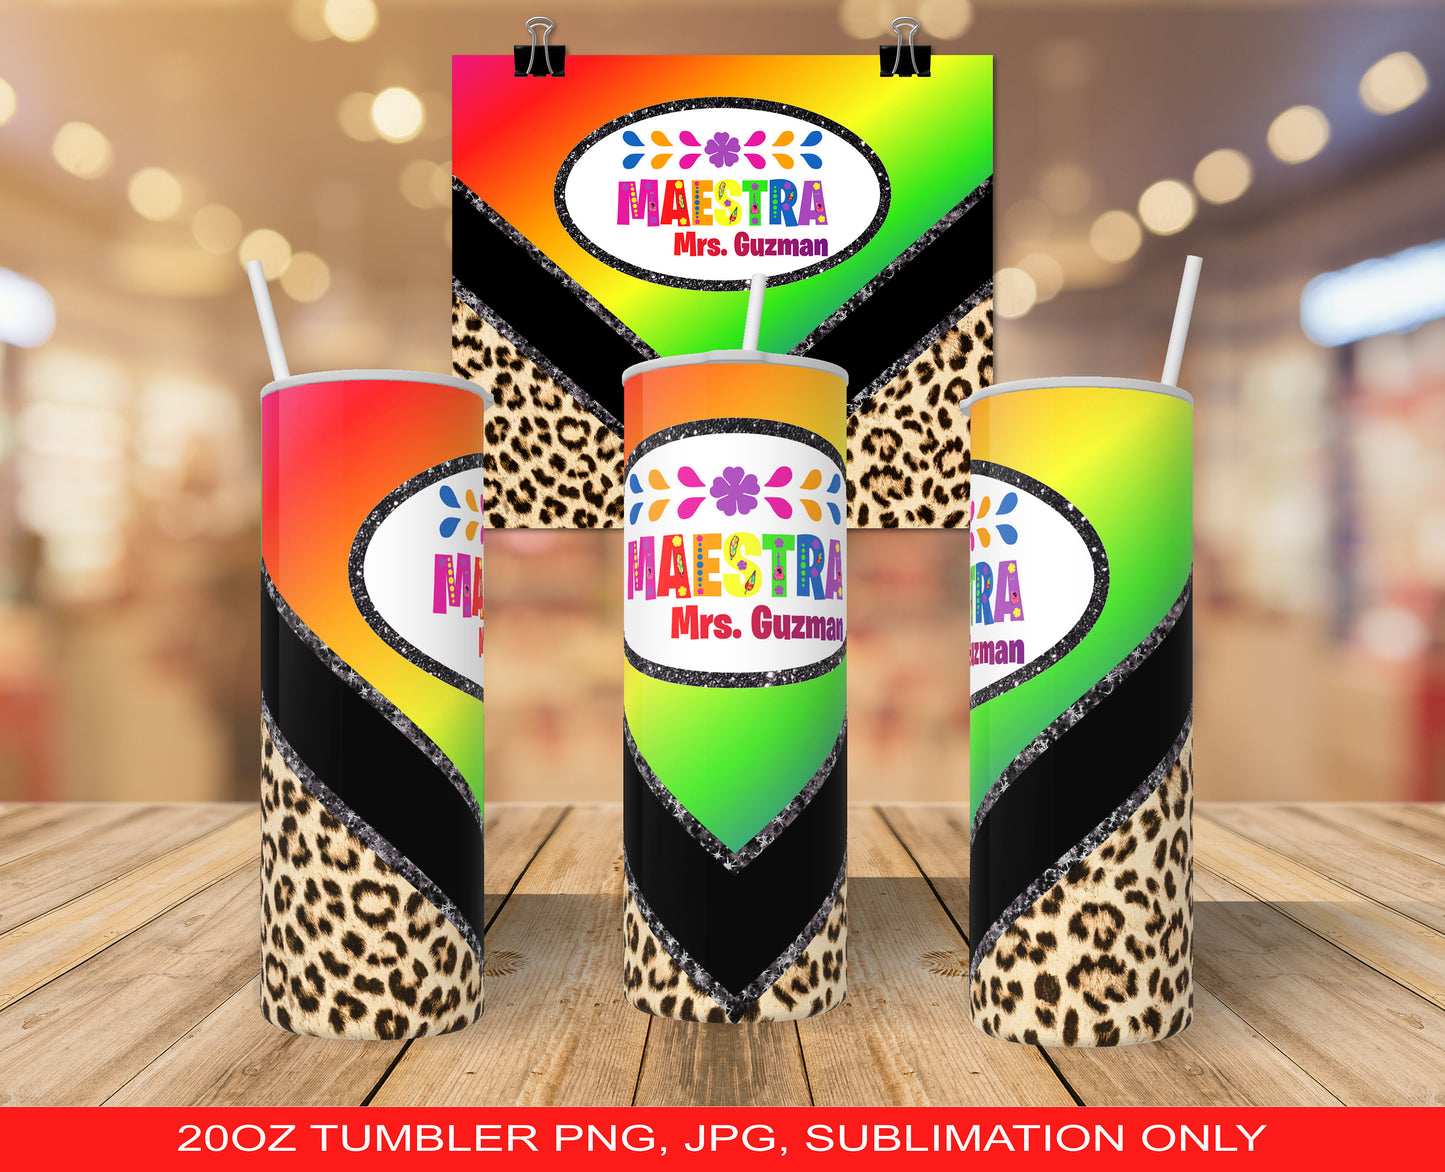 Maestra 20oz Tumbler Design PNG and JPG ONLY